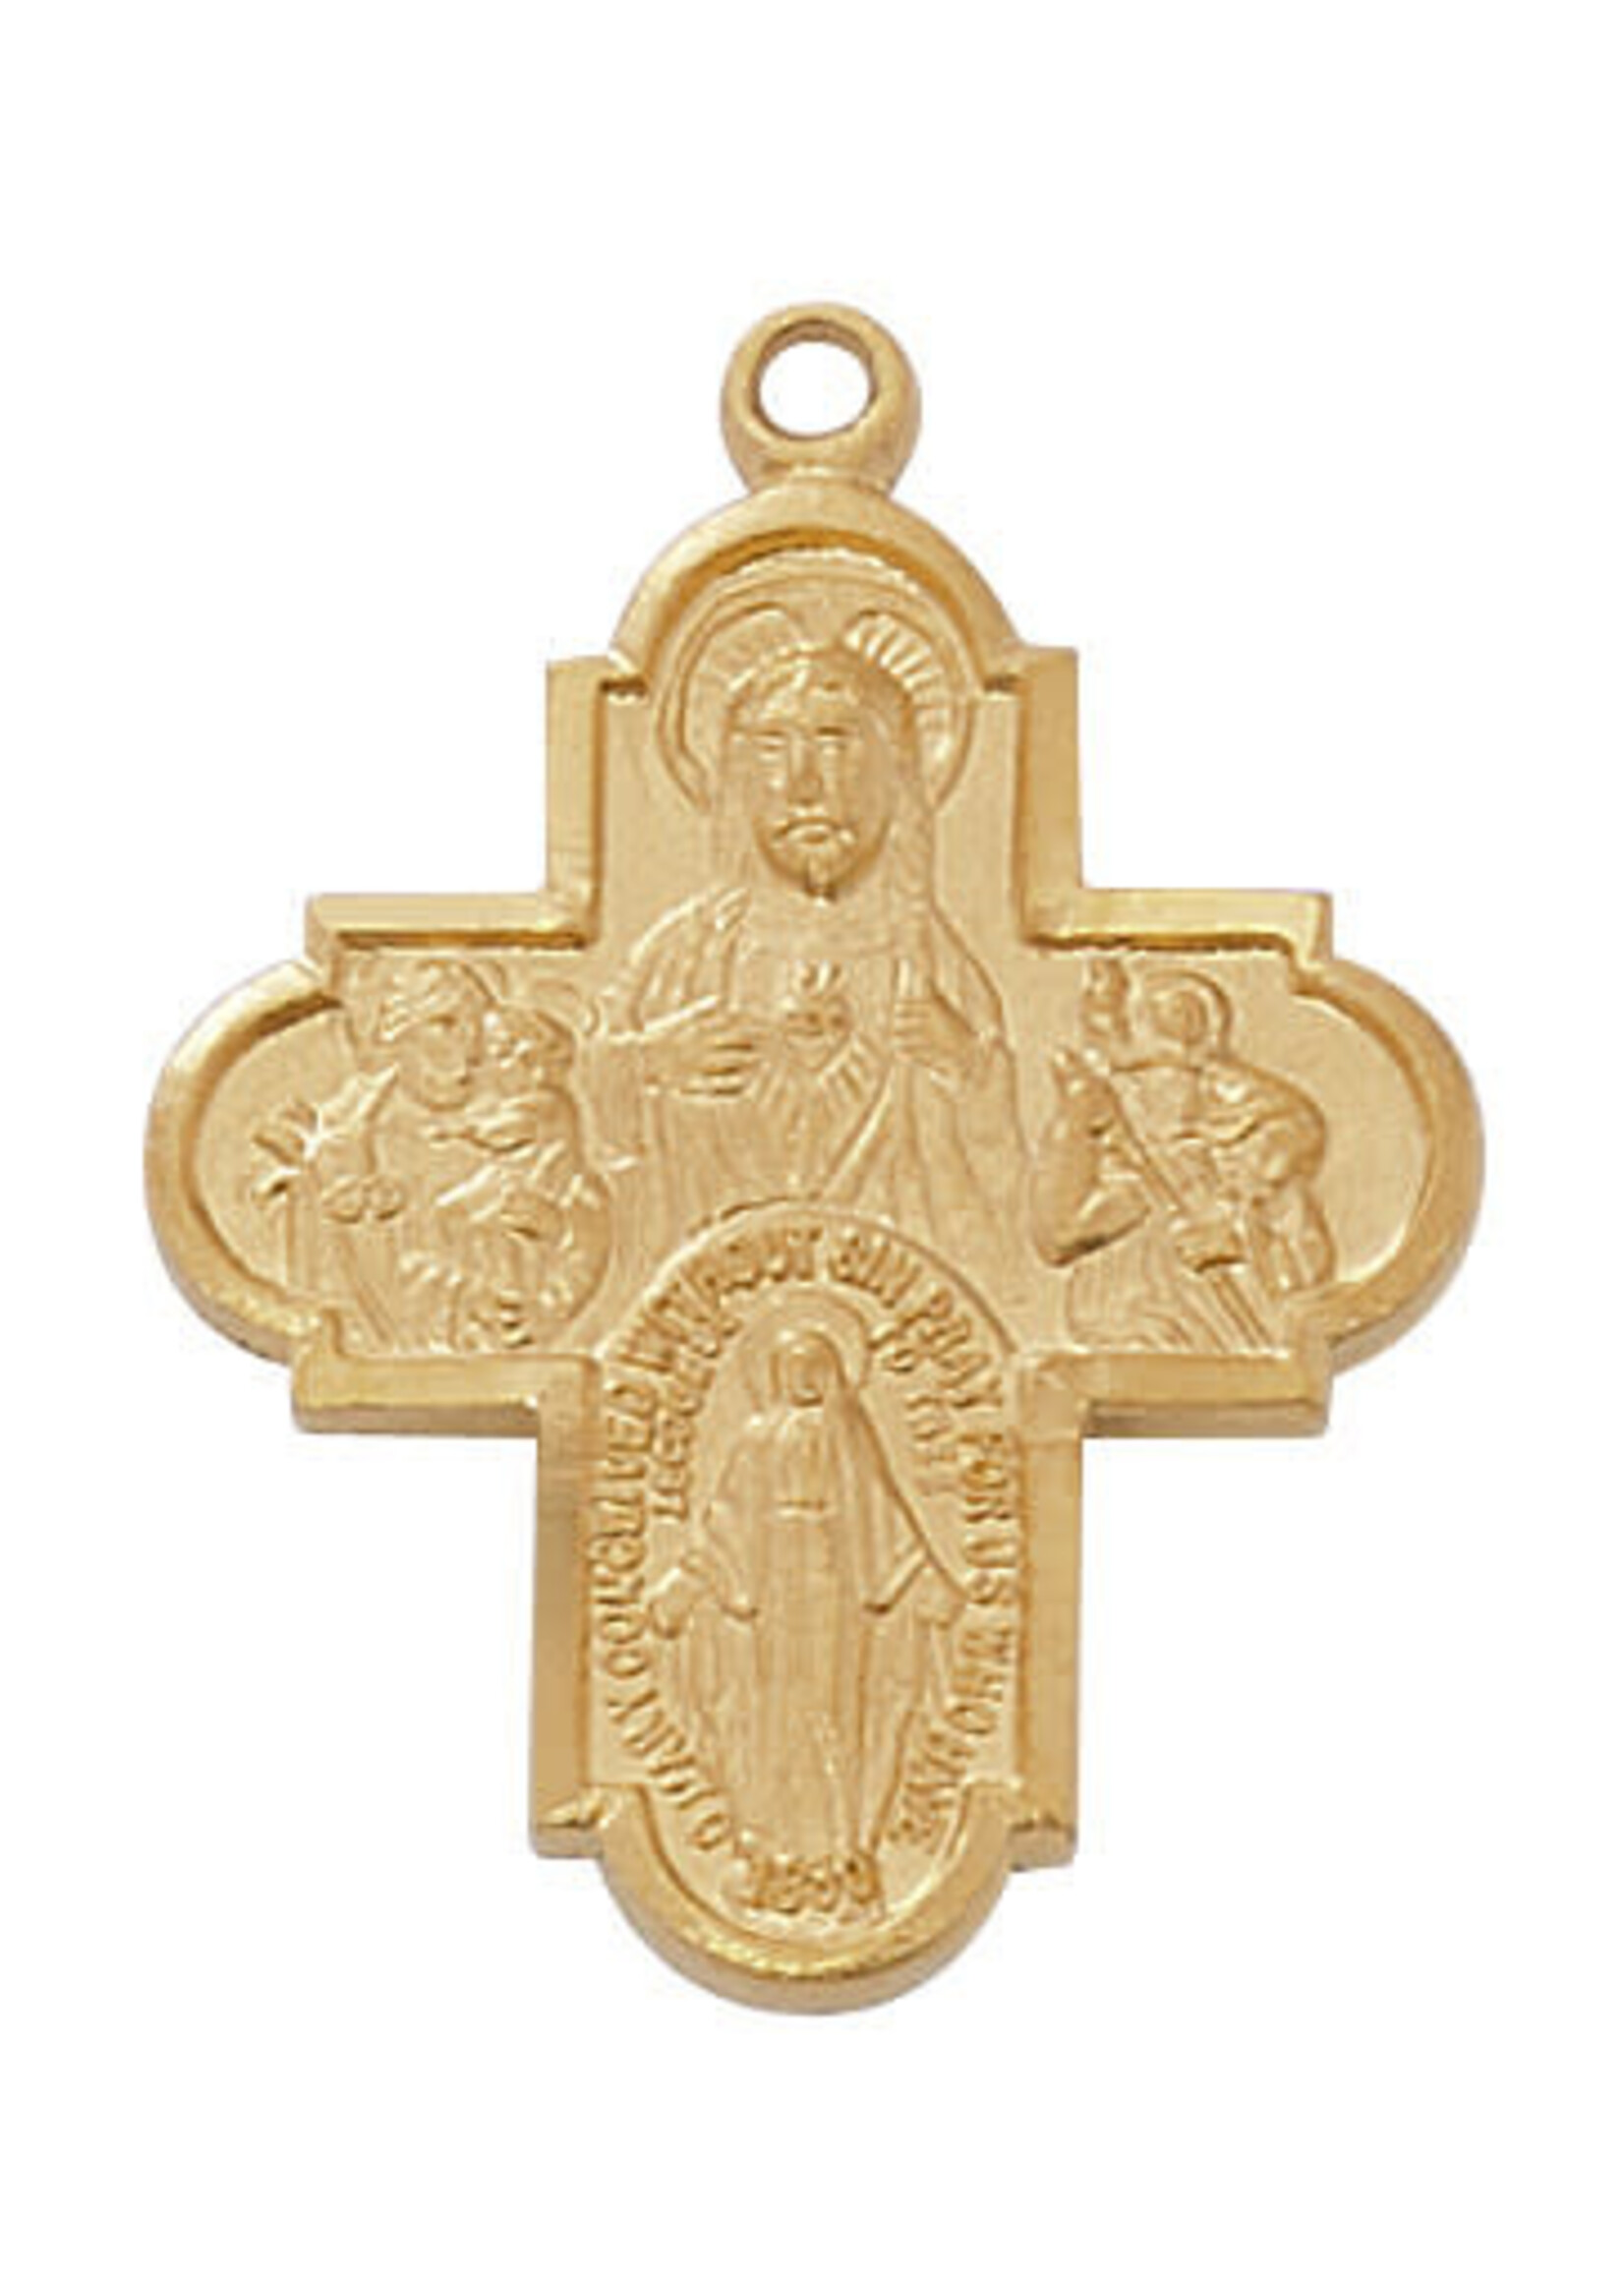 4-Way Cross pendant, gold over sterling silver, 18" rhodium chain